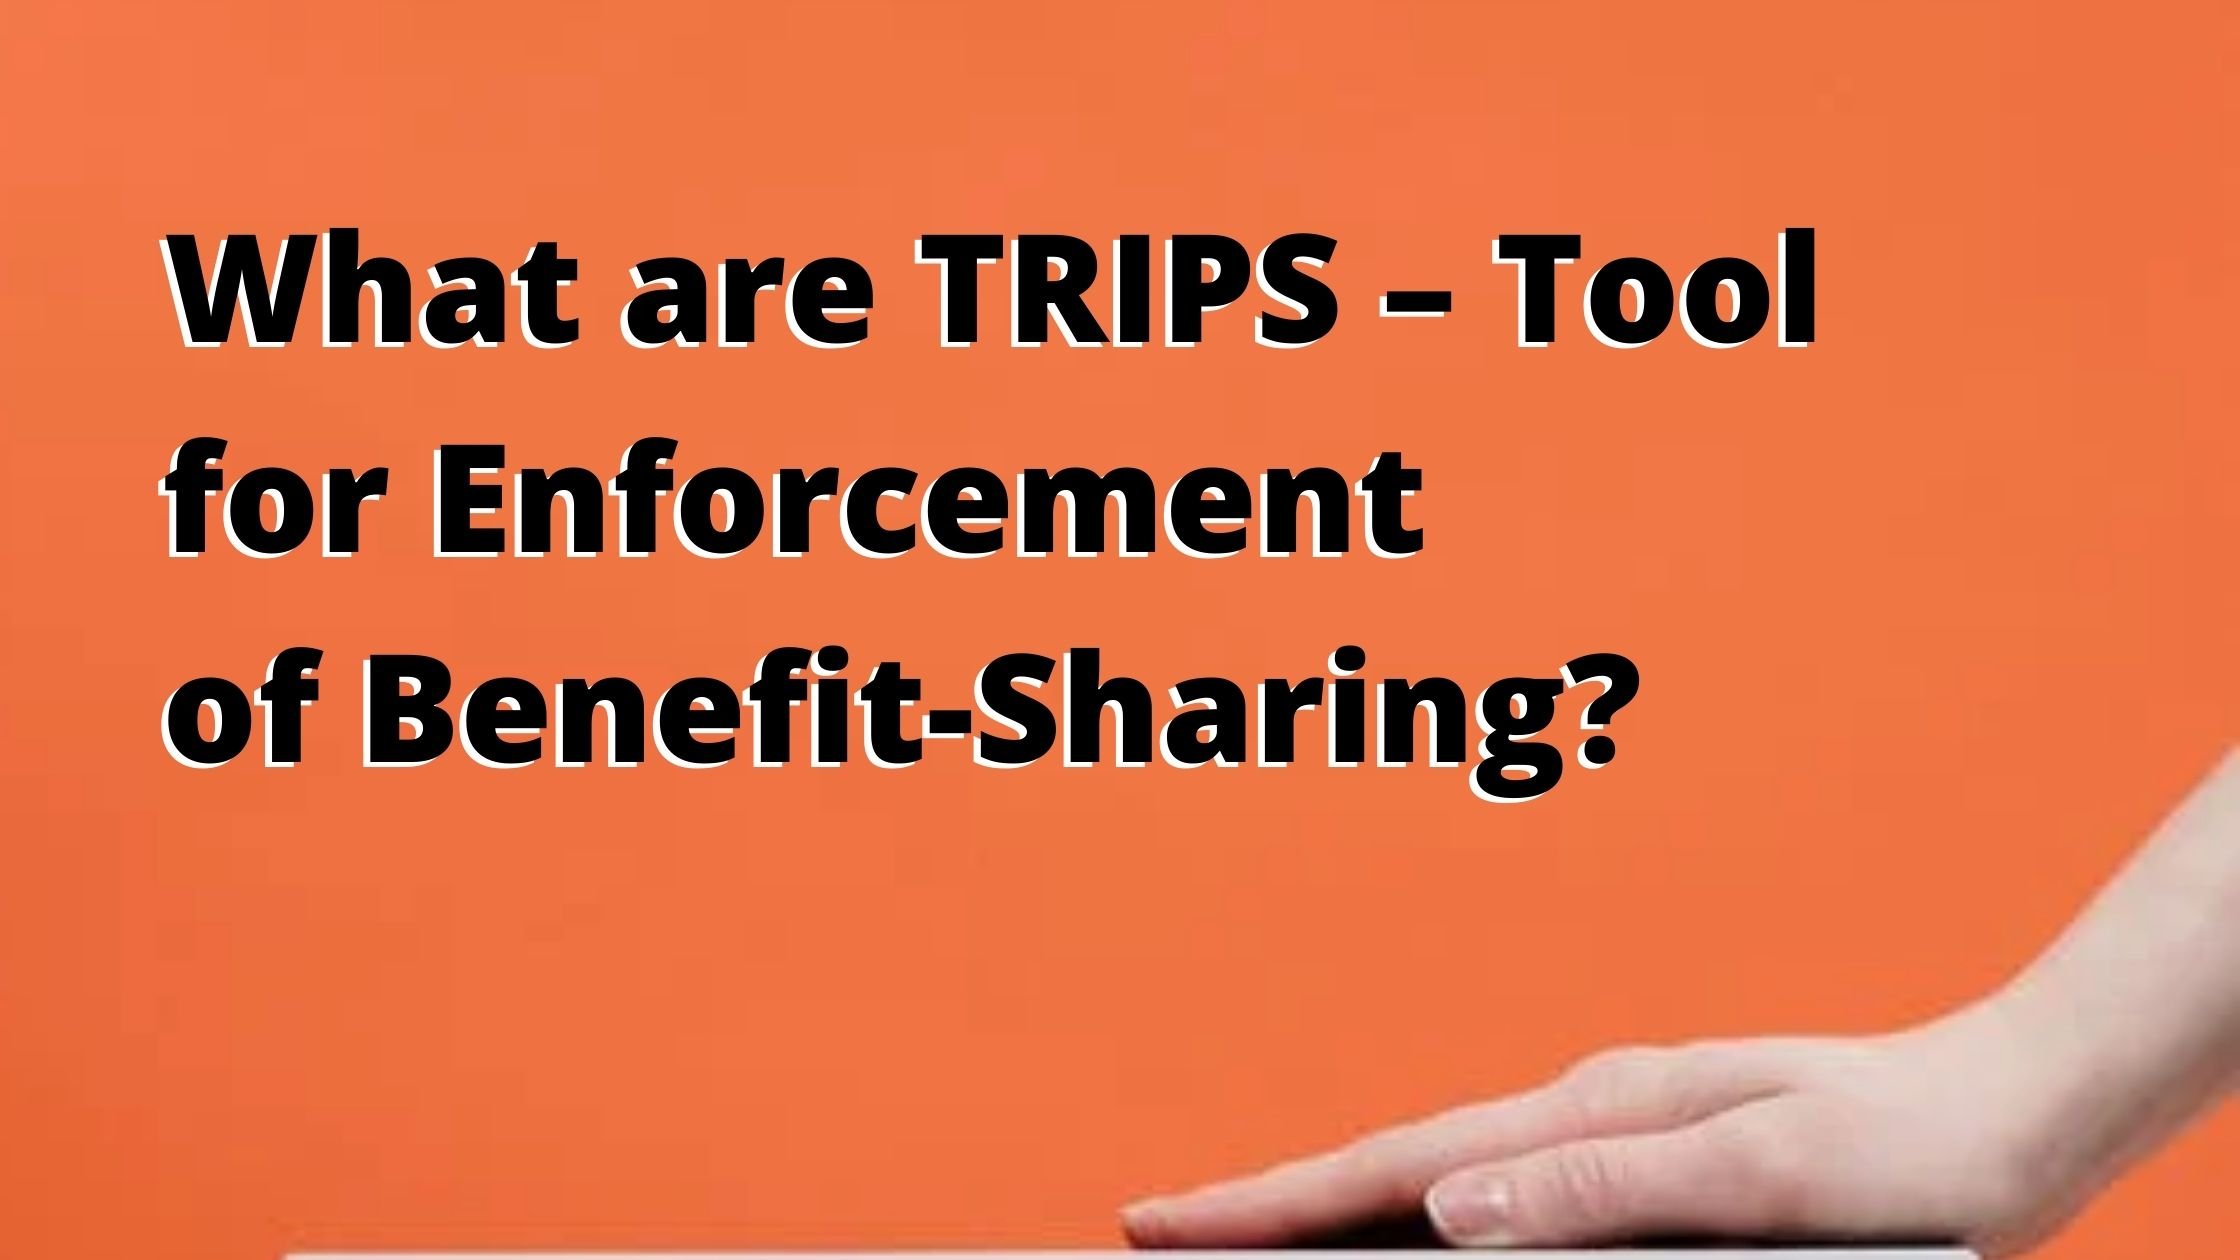 What are TRIPS – Tool for Enforcement of Benefit-Sharing?